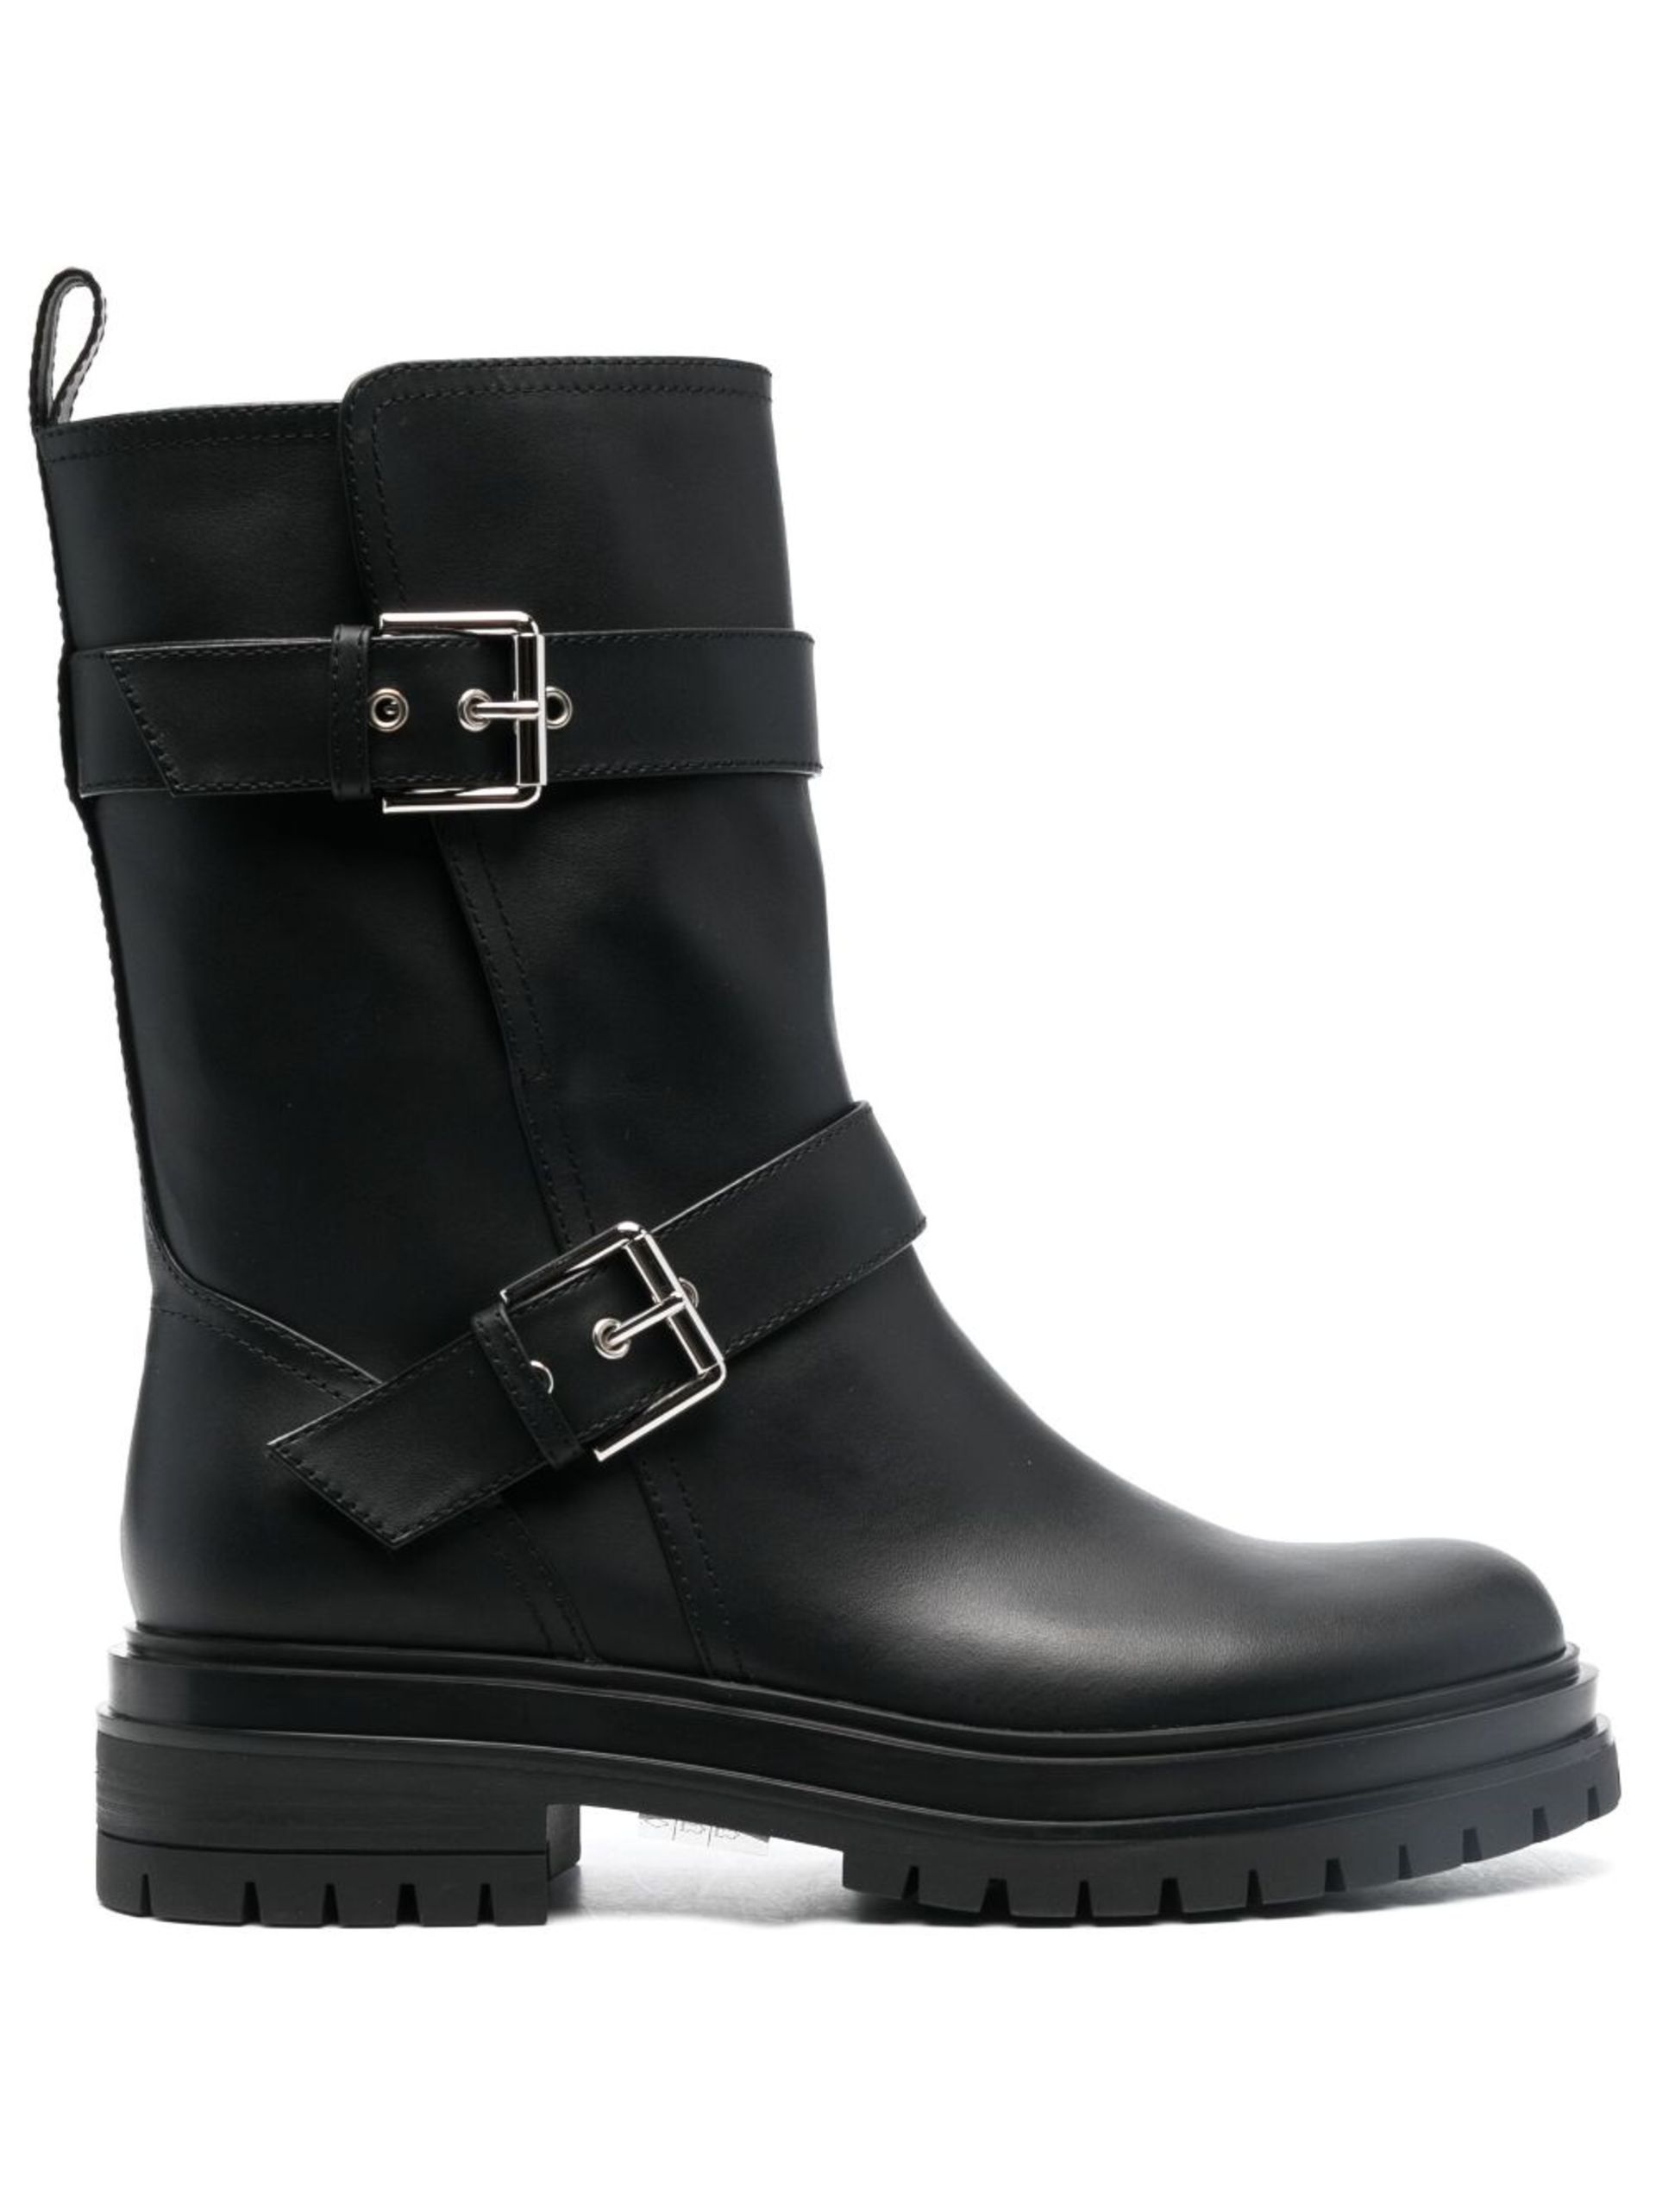 Black Amphibian Buckled Ankle Boots - 1